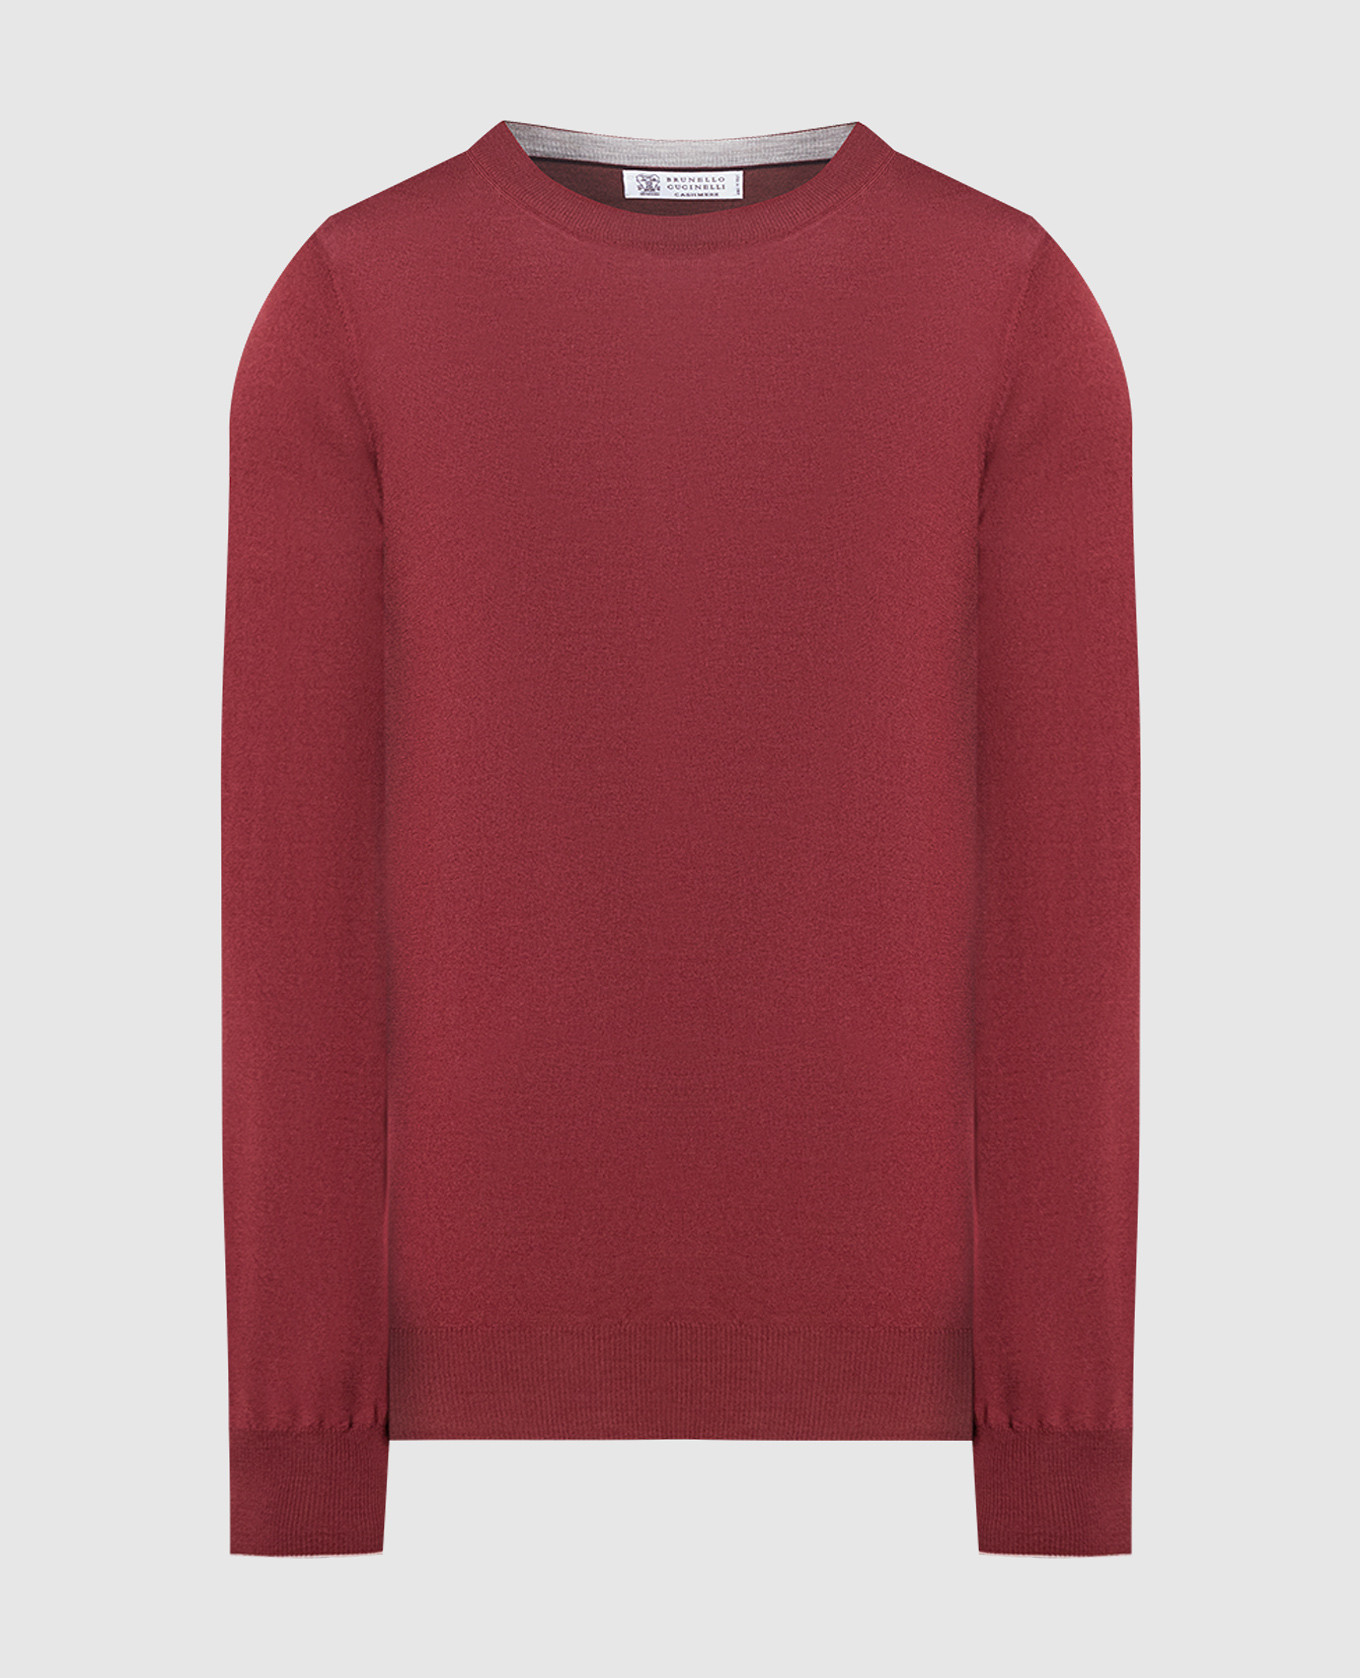 Burgundy wool and cashmere jumper